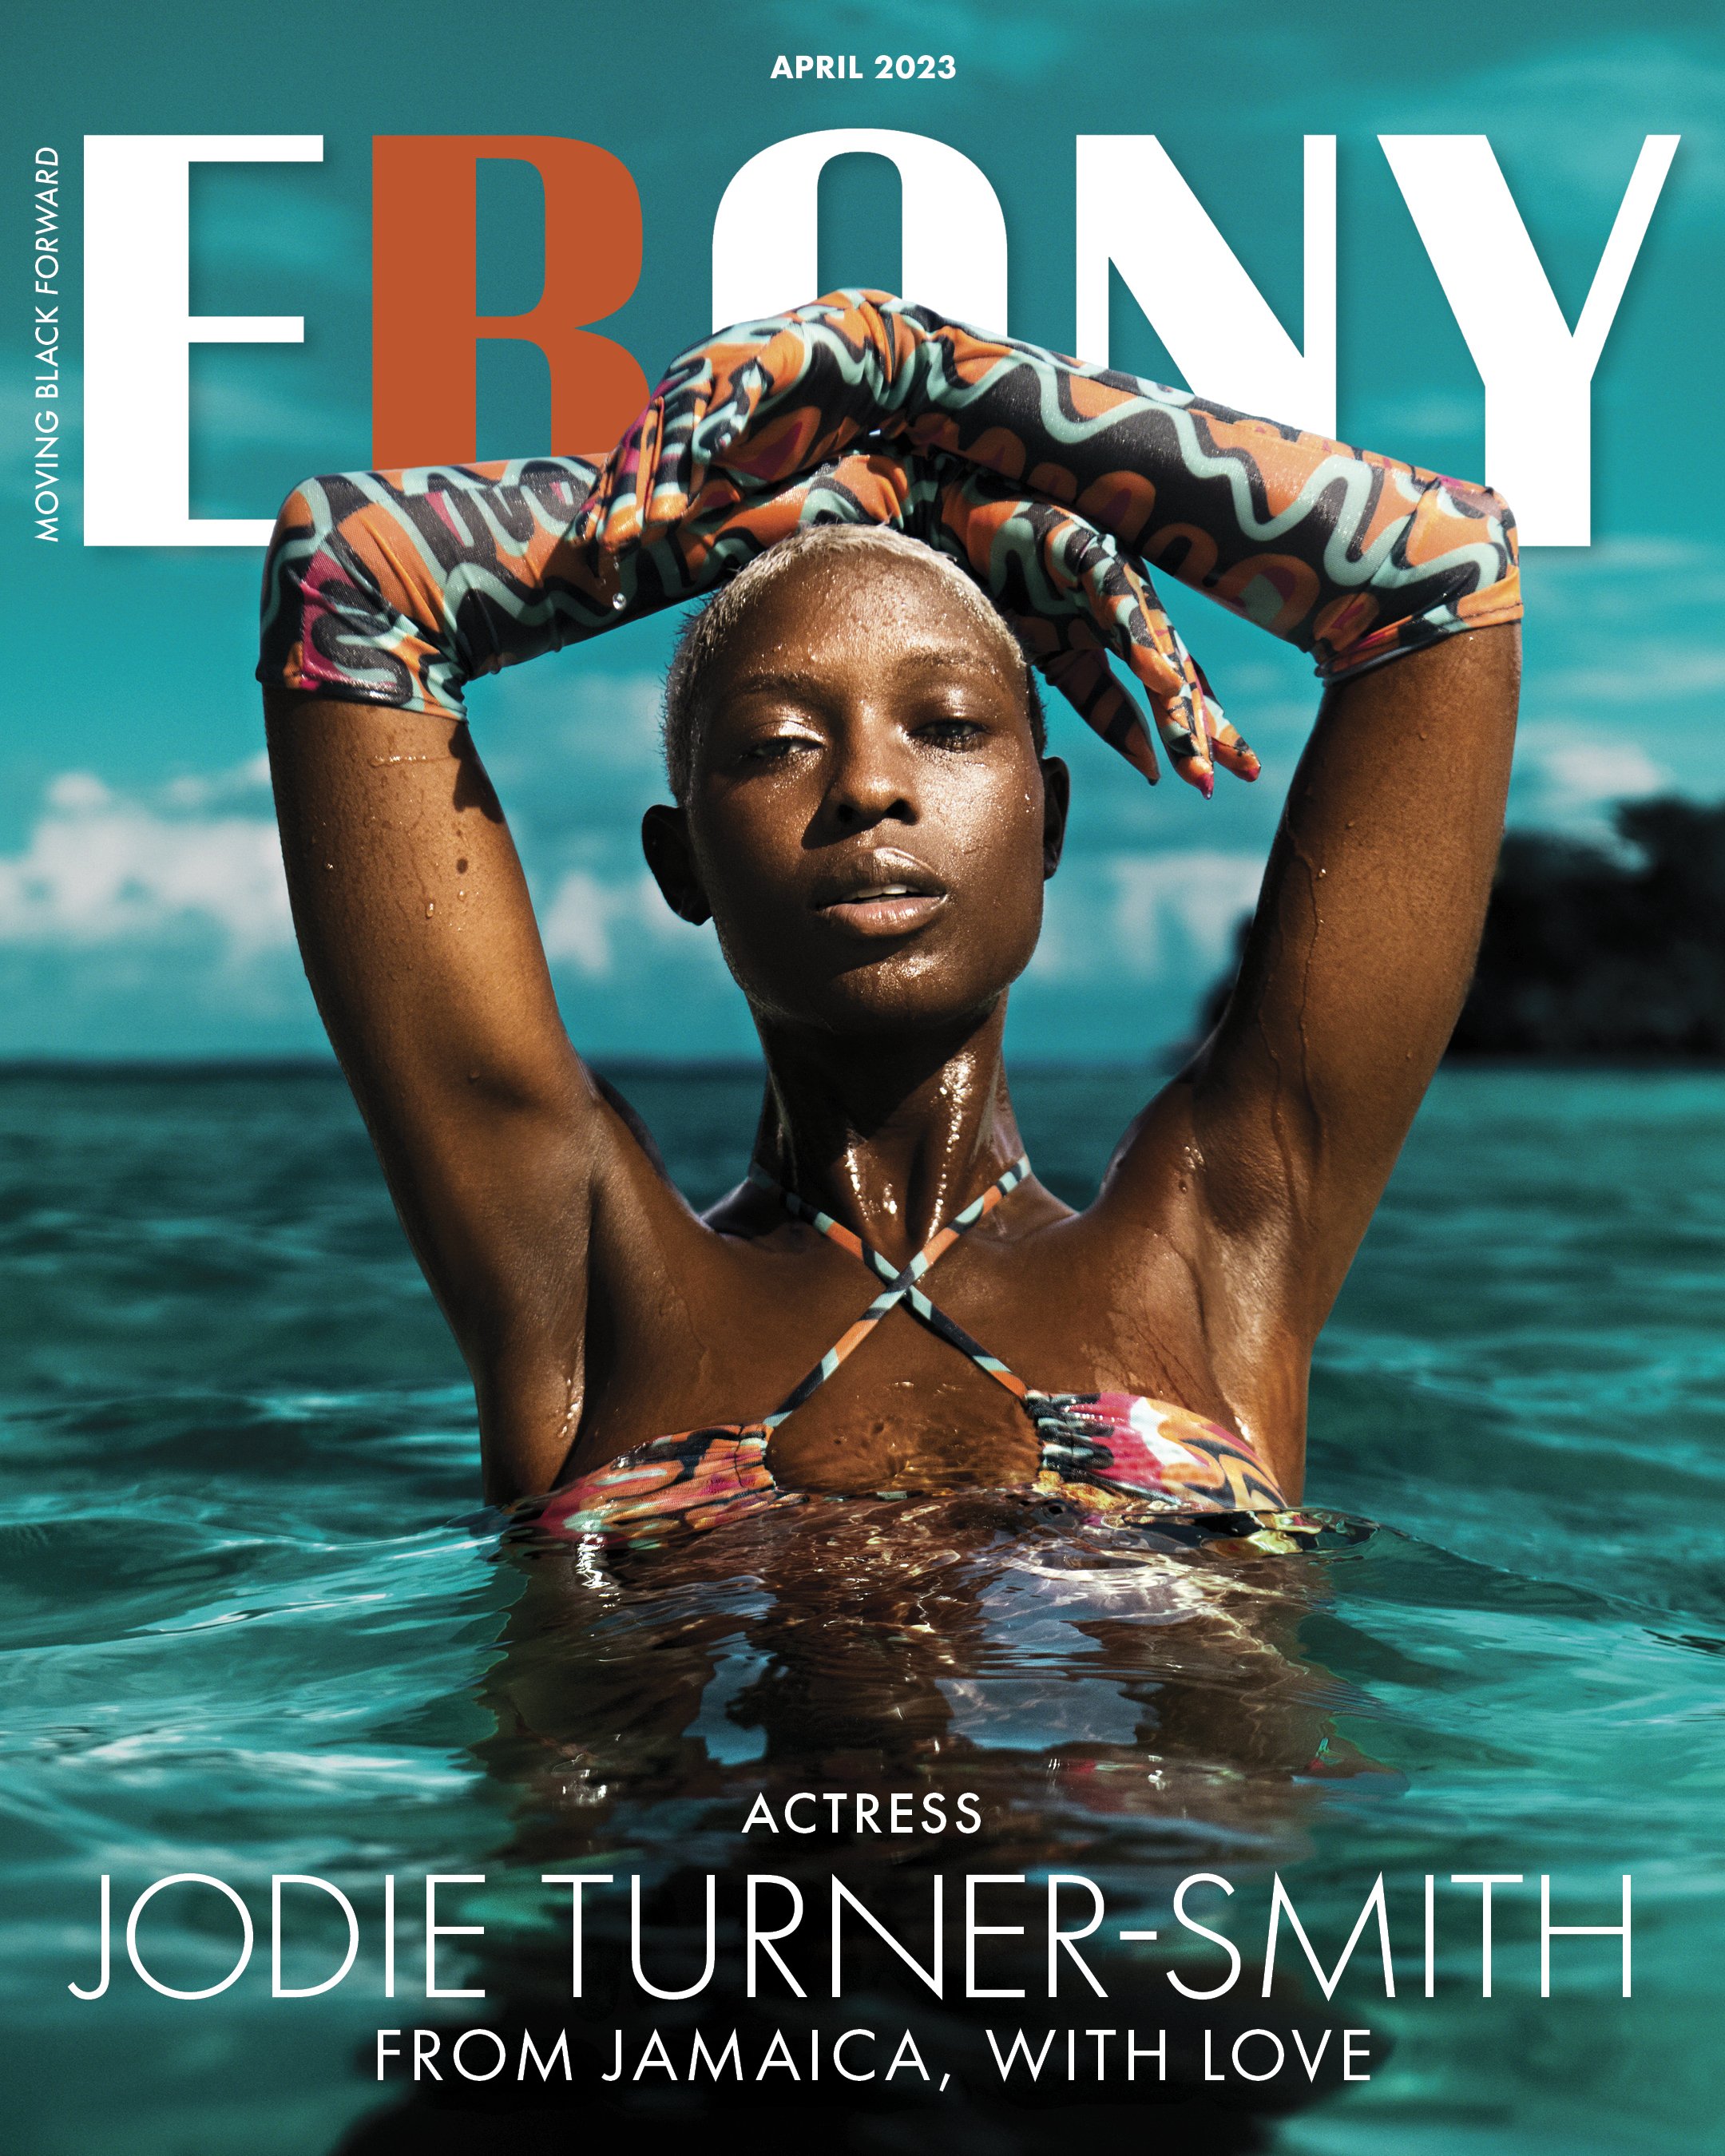 Jodie Turner Smith Final Cover.jpg